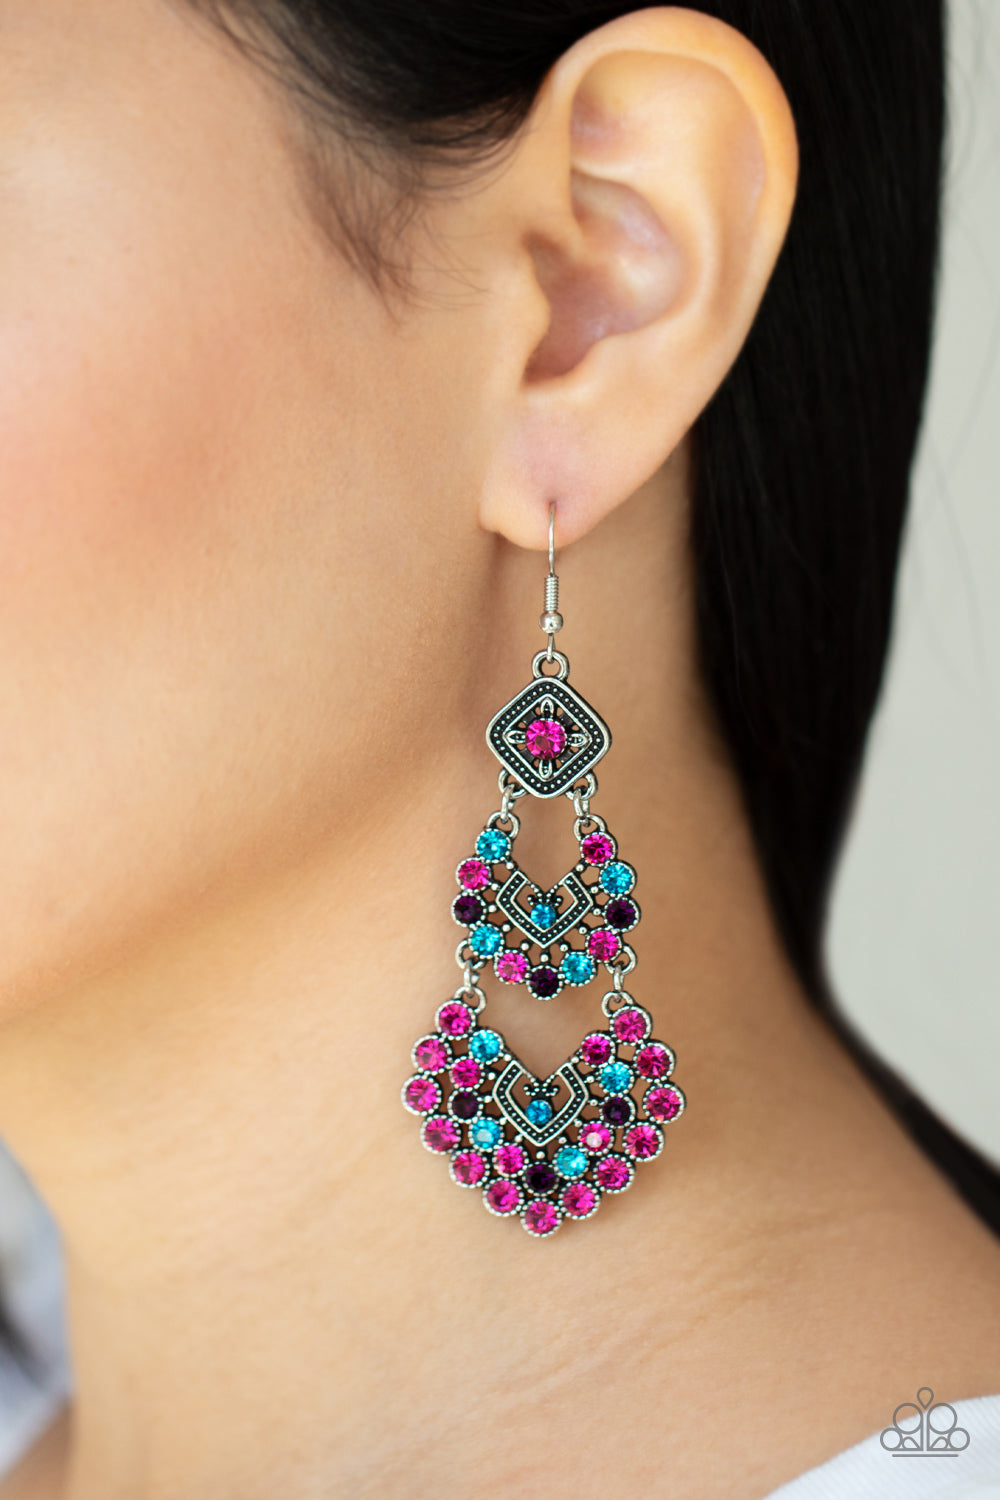 Paparazzi Accessories - All For The GLAM - Multi Earrings